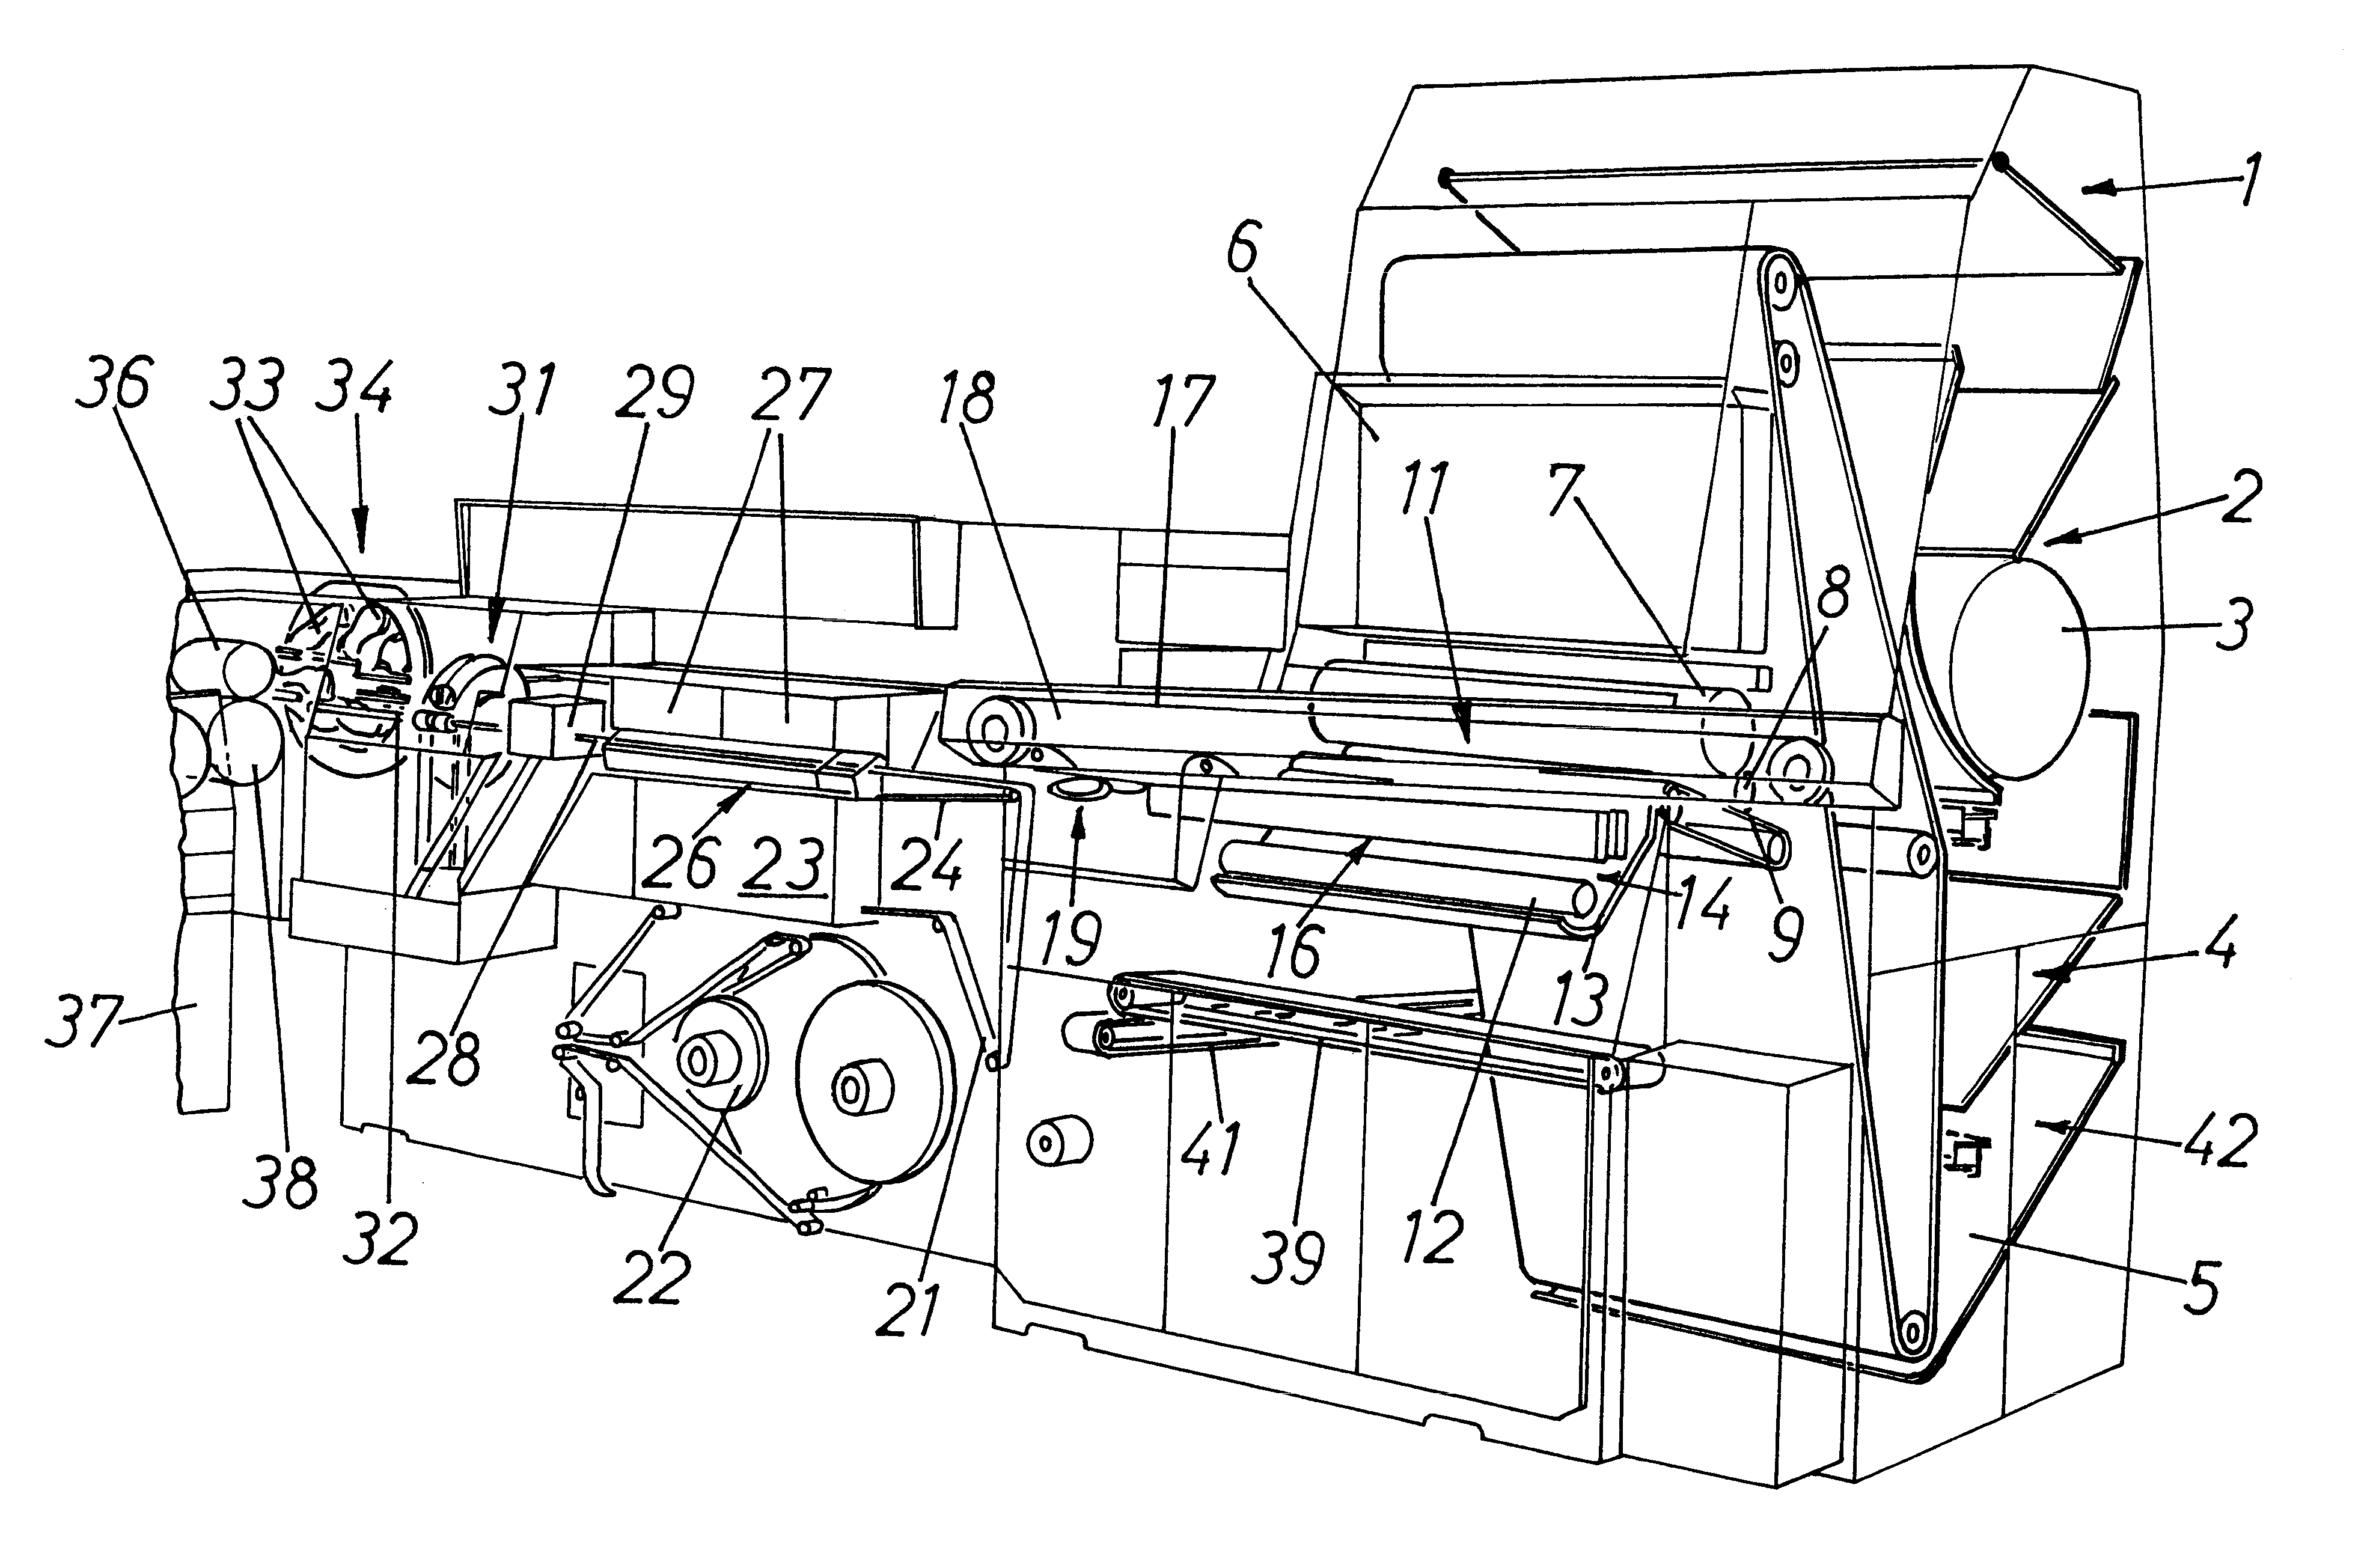 Apparatus for applying printed matter to webs of wrapping material for smokers' products